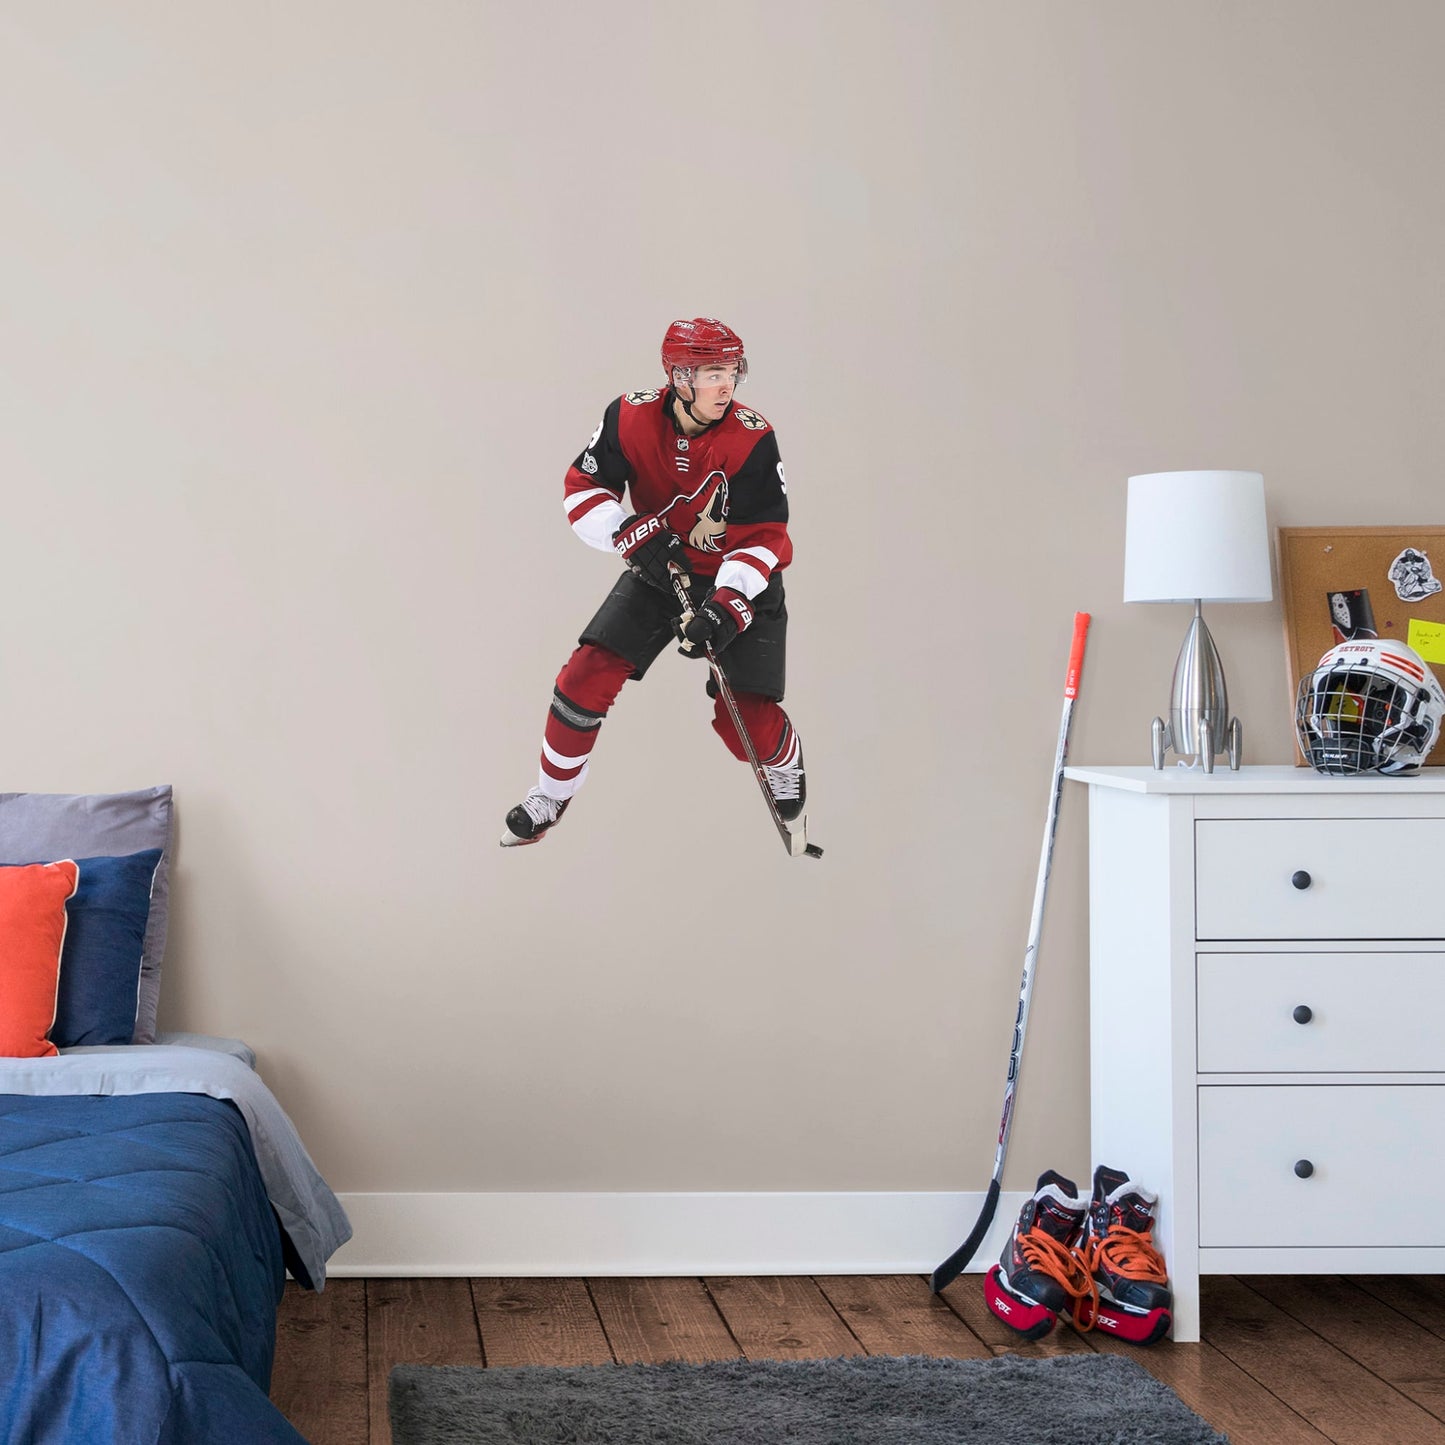 X-Large Athlete + 1 Decal (23"W x 39"H) Drafted seventh overall in the 2016, left wing player Clayton Keller is melting ice at Gila River Arena in Glendale. Cheer on Kellsy as he leads the Coyotes on to another championship with this distinctive colorful officially licensed NHL wall decal. Make a slap shot on a wall in your home, office, or coyote fan-den with this giftable reusable NHL decal. Perfect gift idea for a fan!